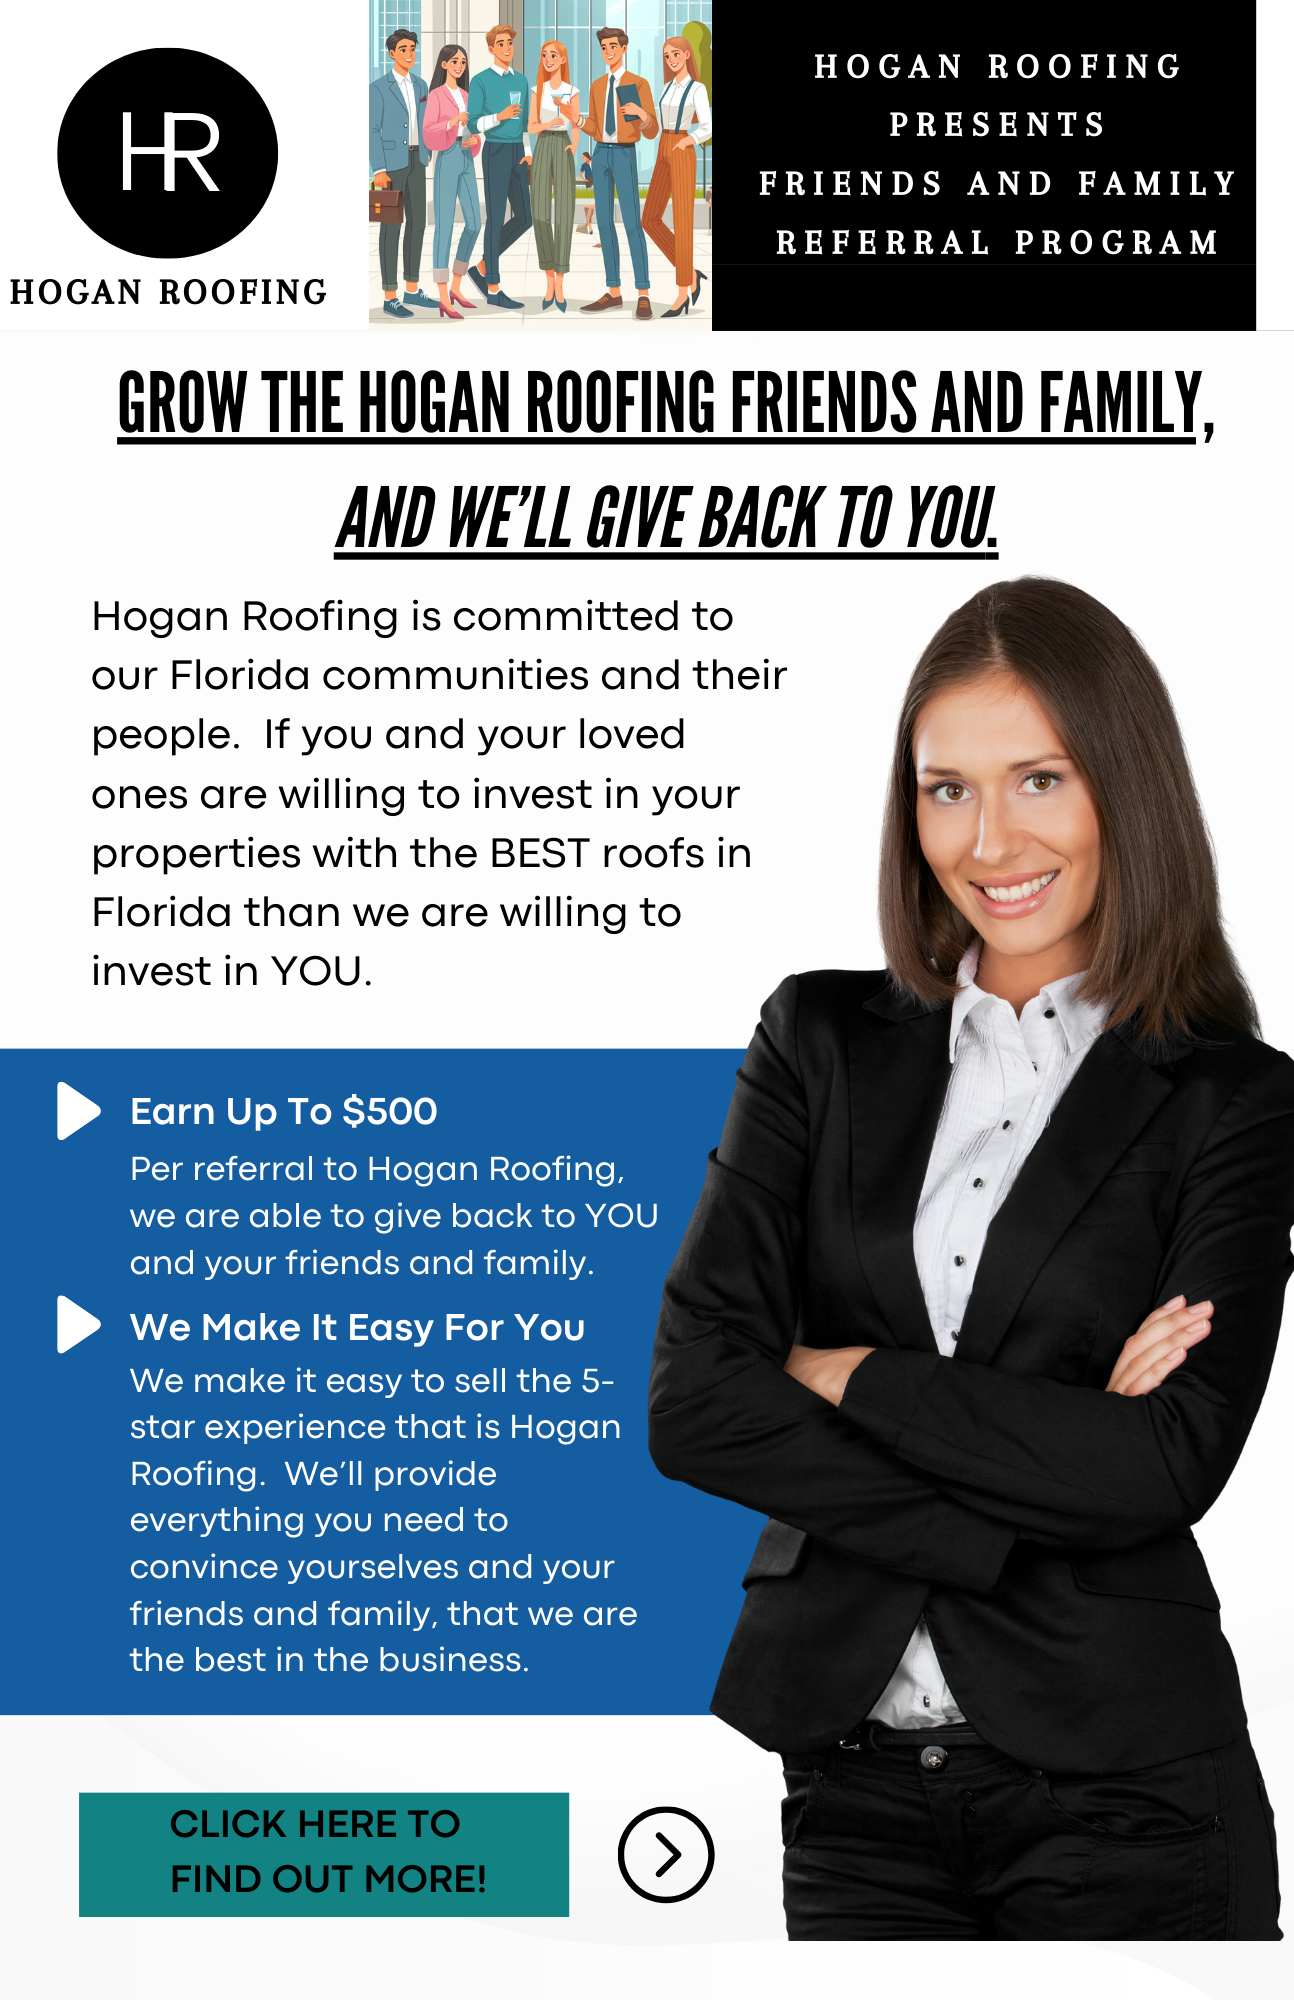 Referral Program Flyer Hogan Roofing Friends and Family Orlando Contractor